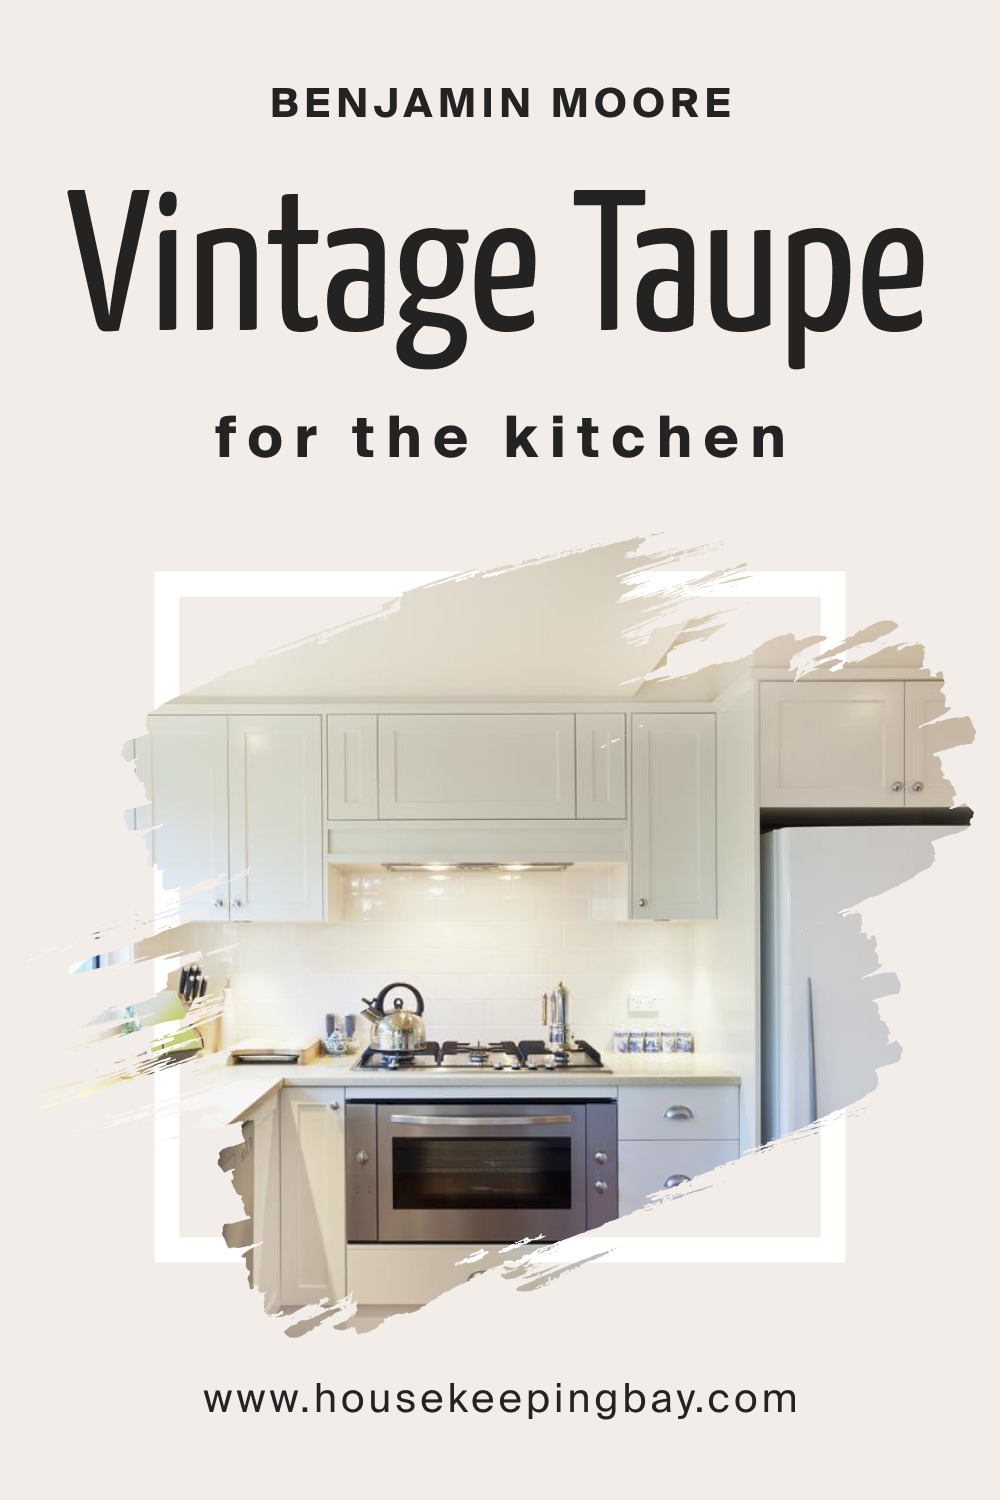 Benjamin Moore. Vintage Taupe 2110 70 for the Kitchen